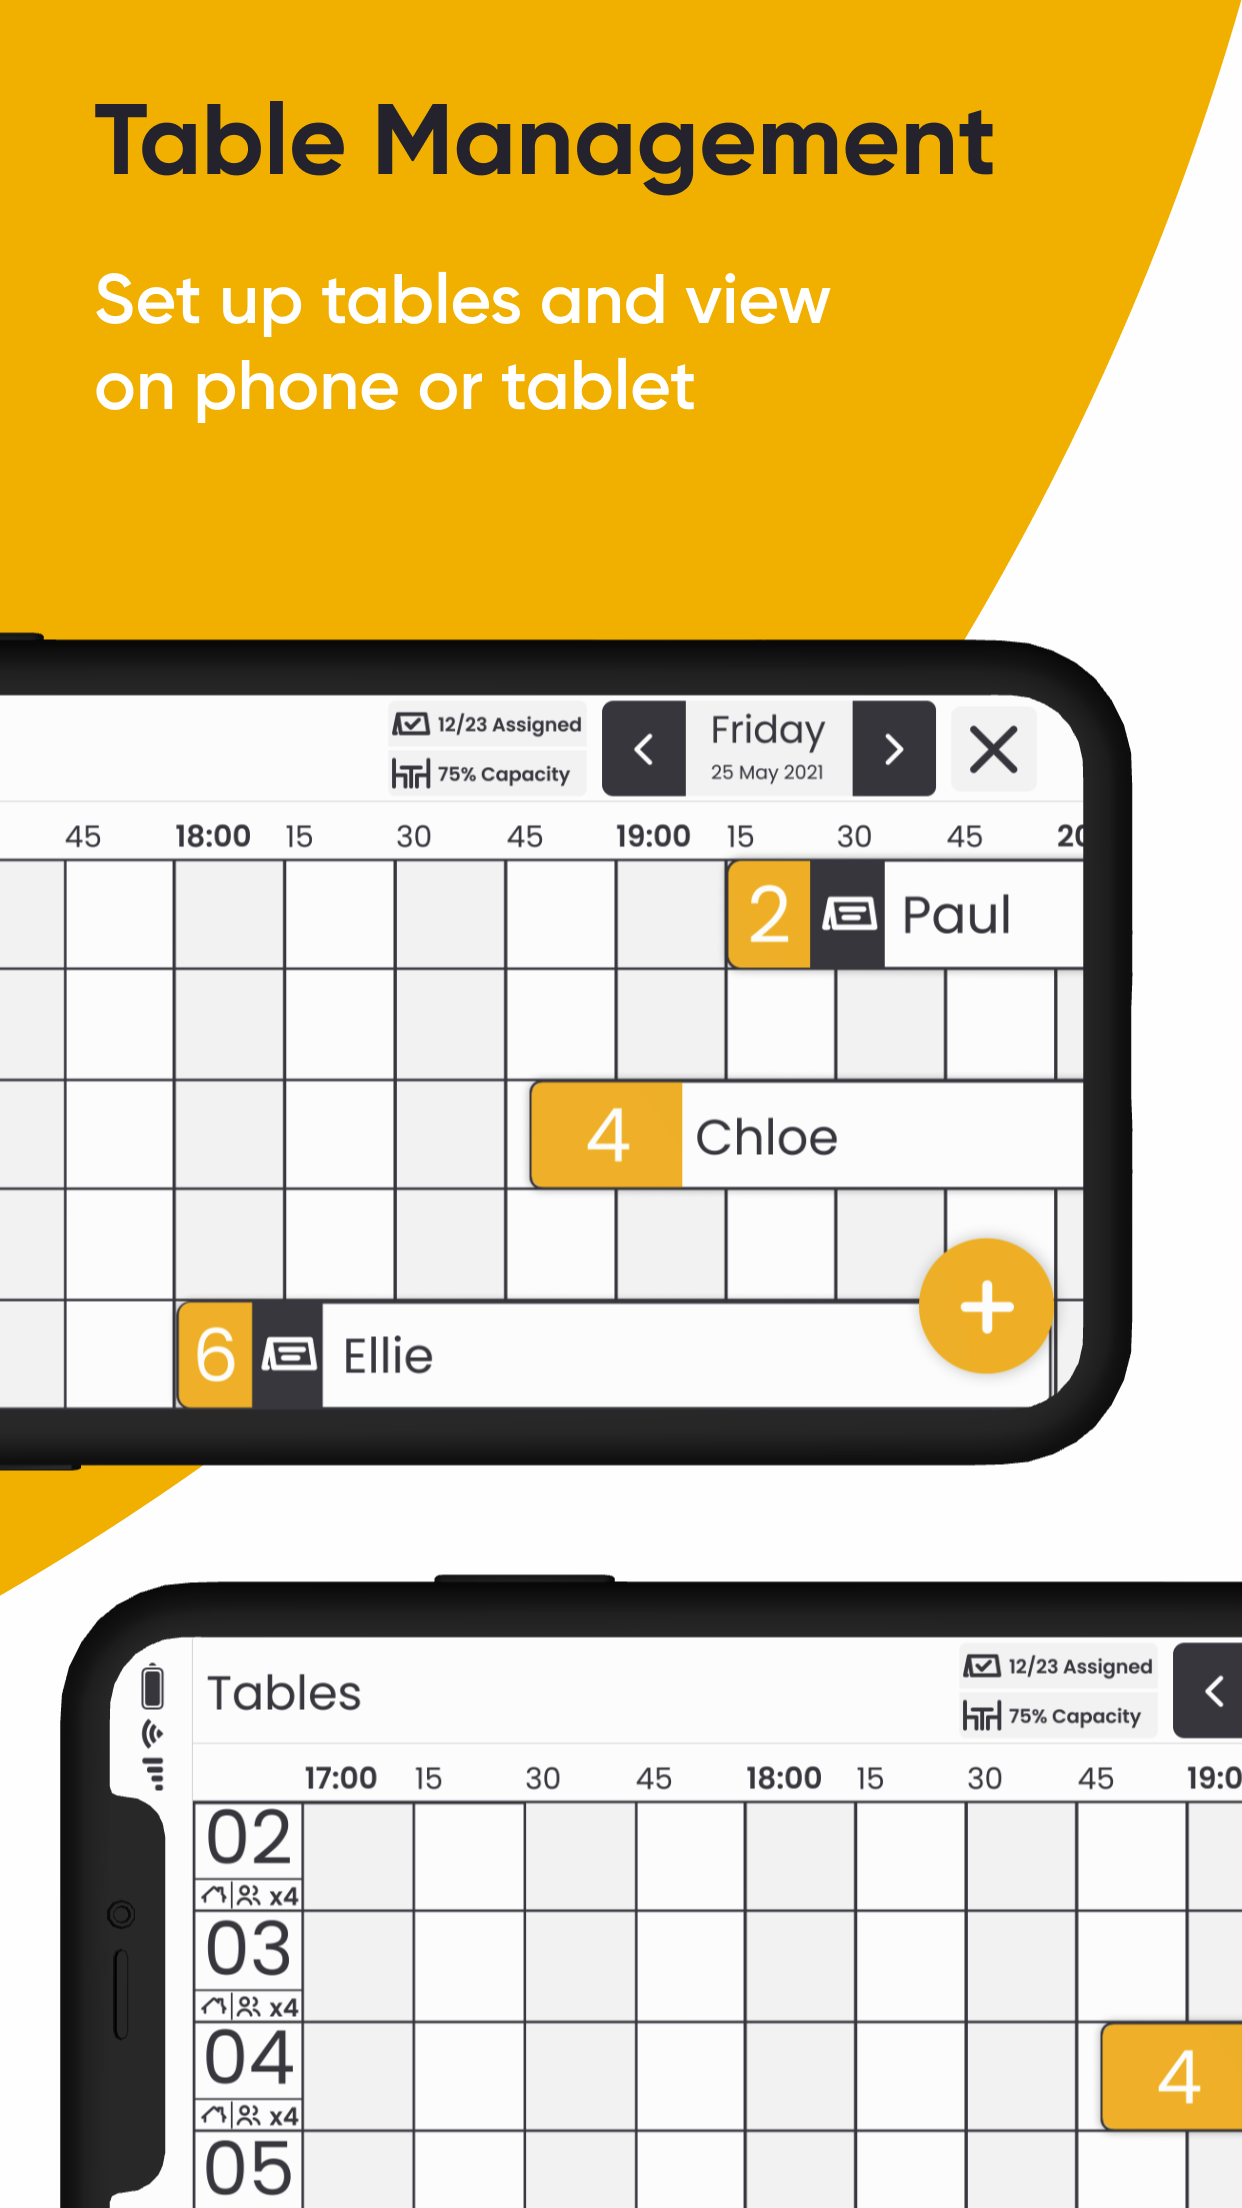 Carbonara Software - Table Management - Set up tables and view on phone or tablet